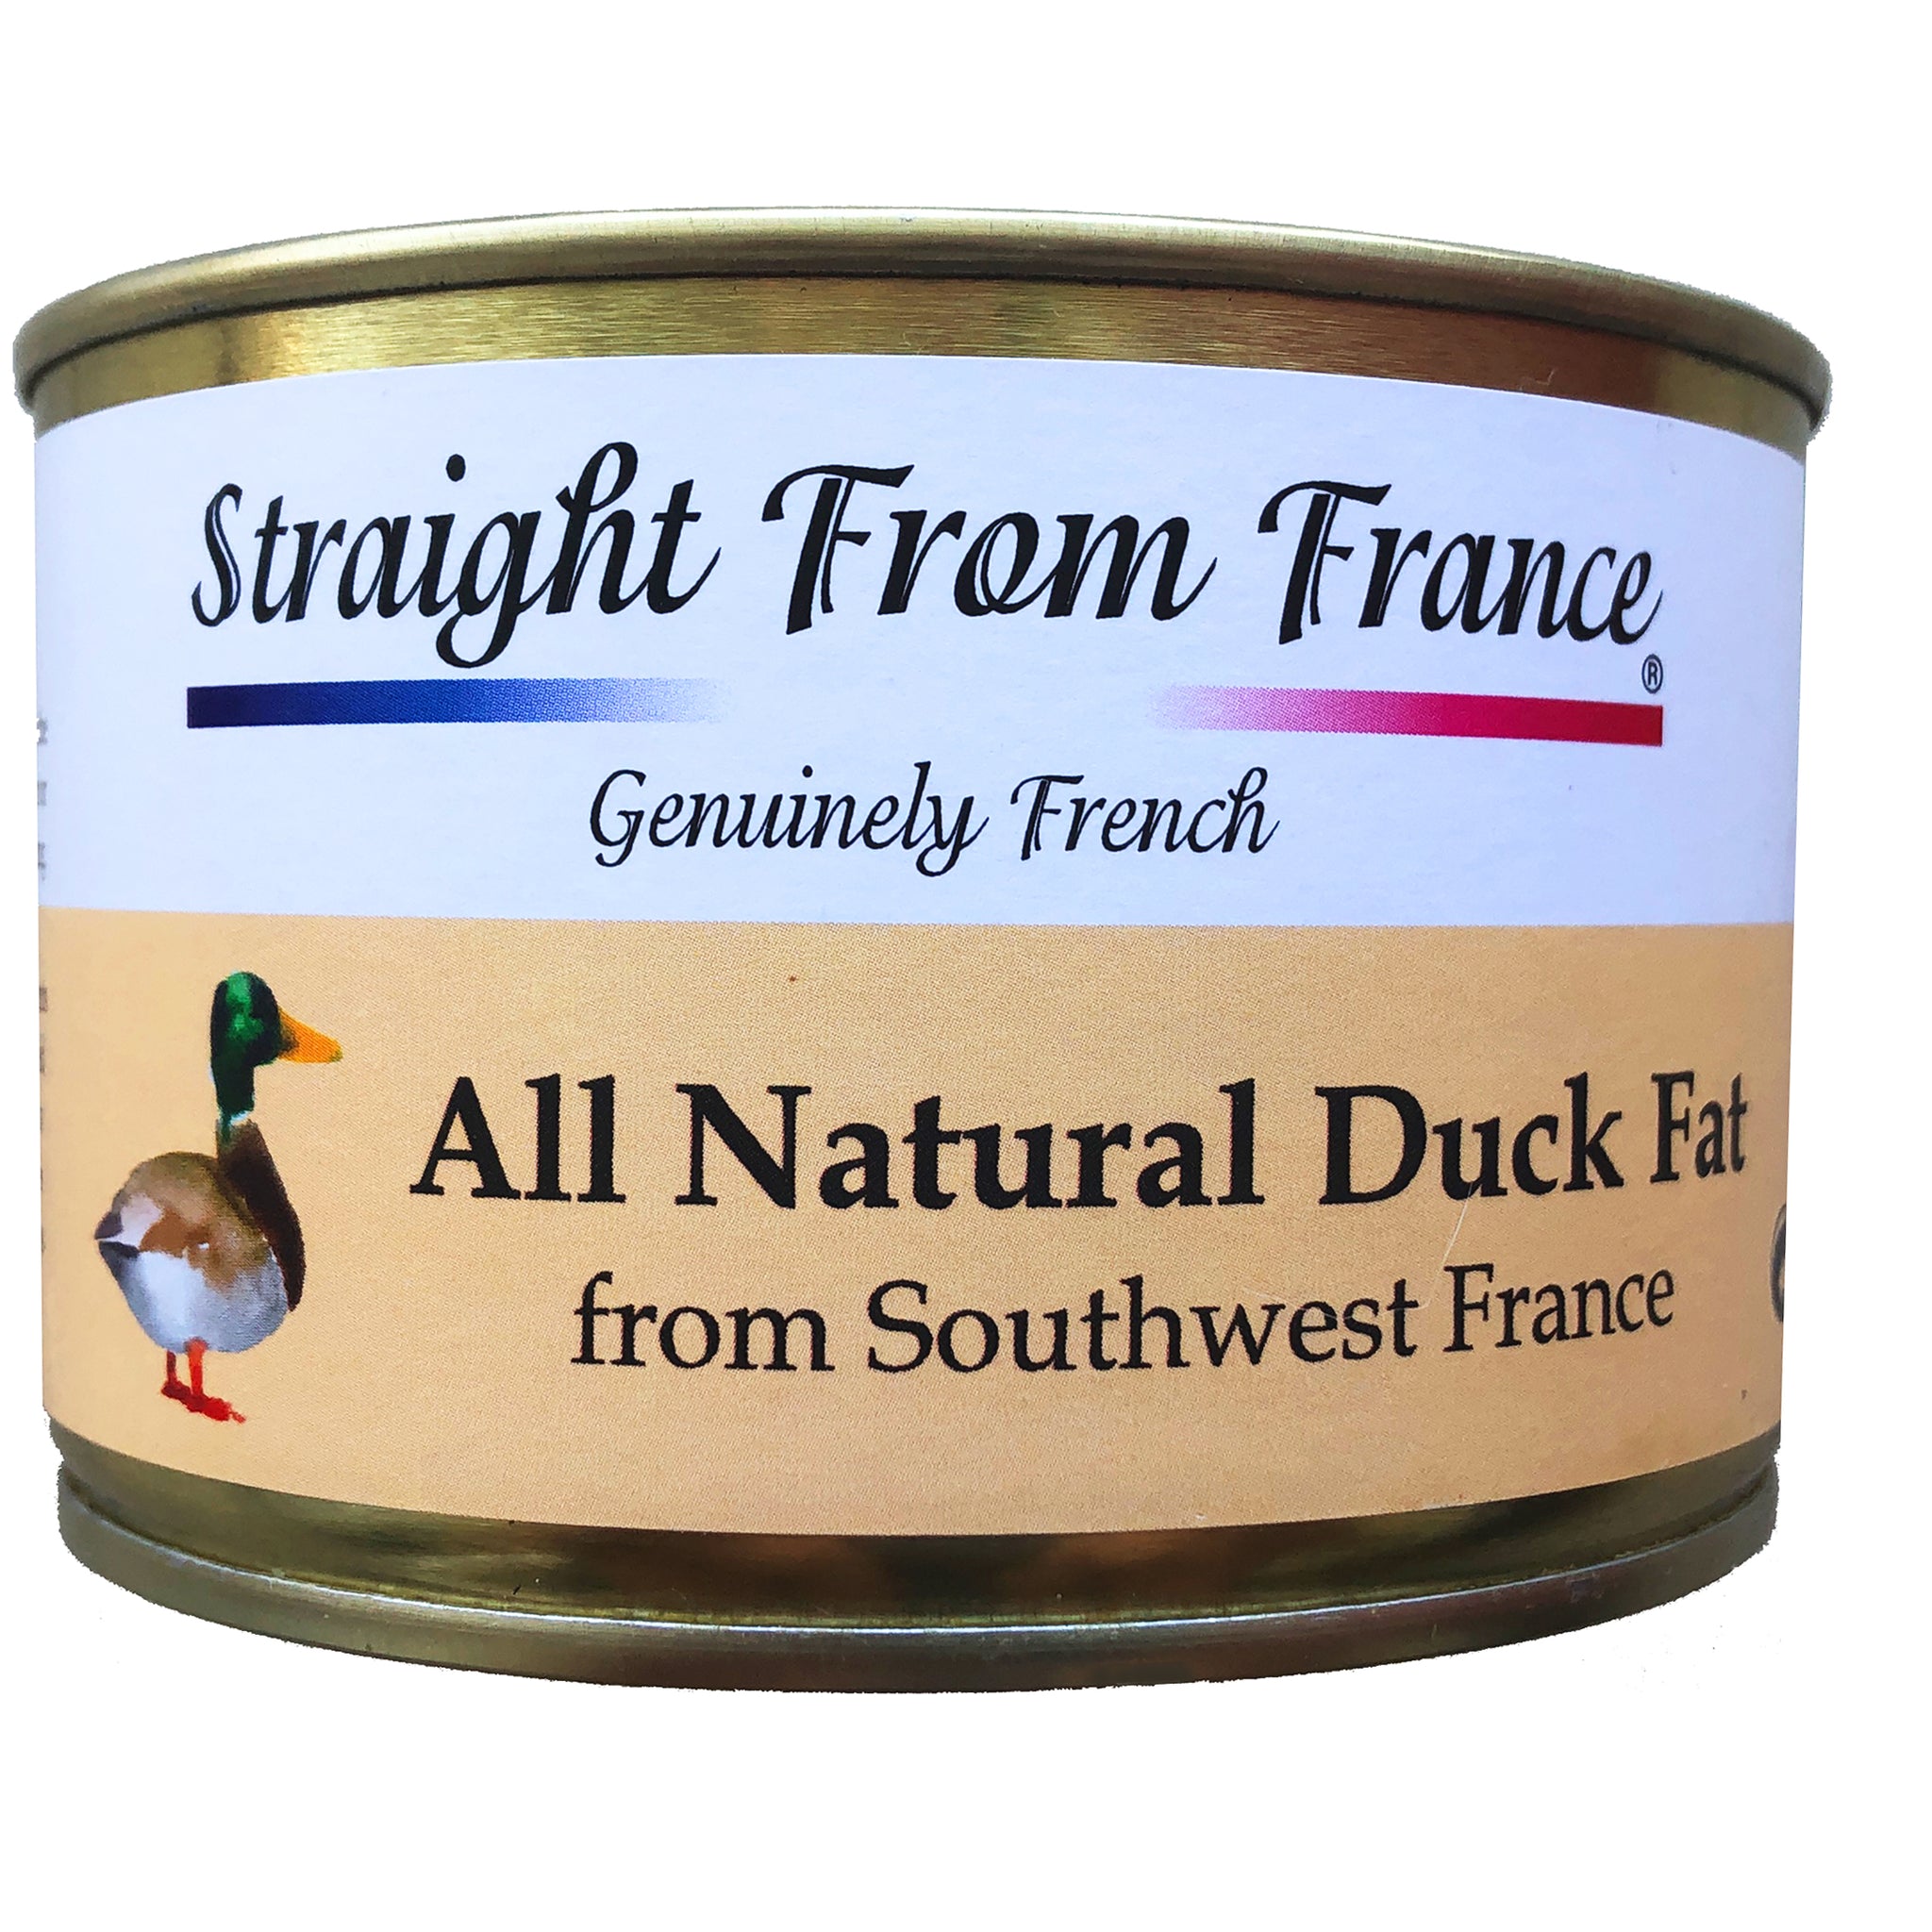 Straight from France Duck Fat from Southwest France